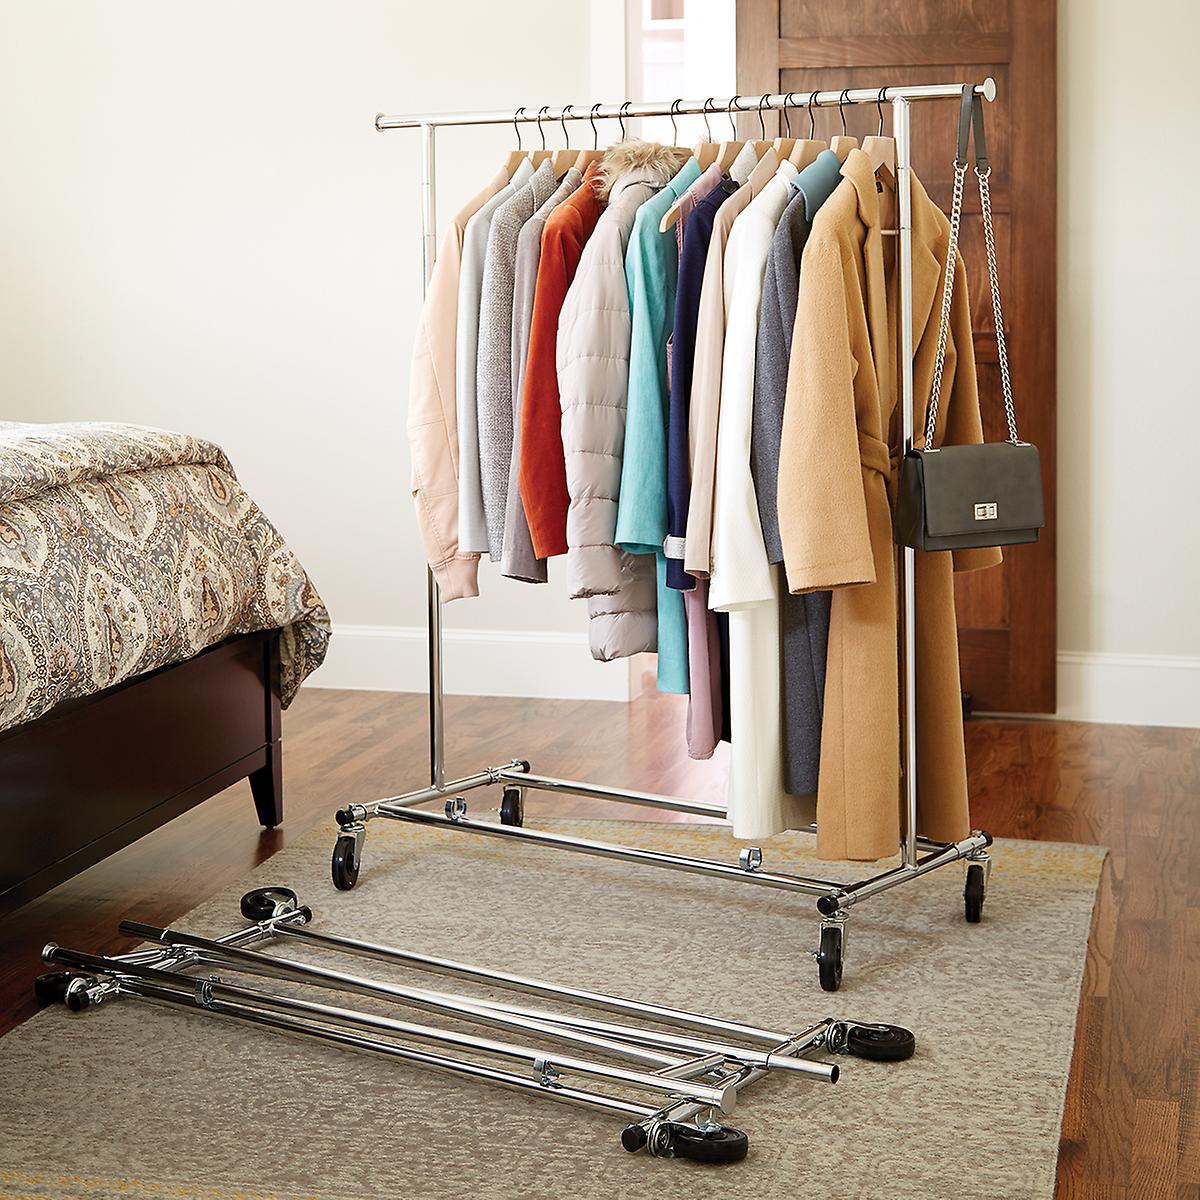 Wall Racks For Clothes Online Store, Save 56% | jlcatj.gob.mx